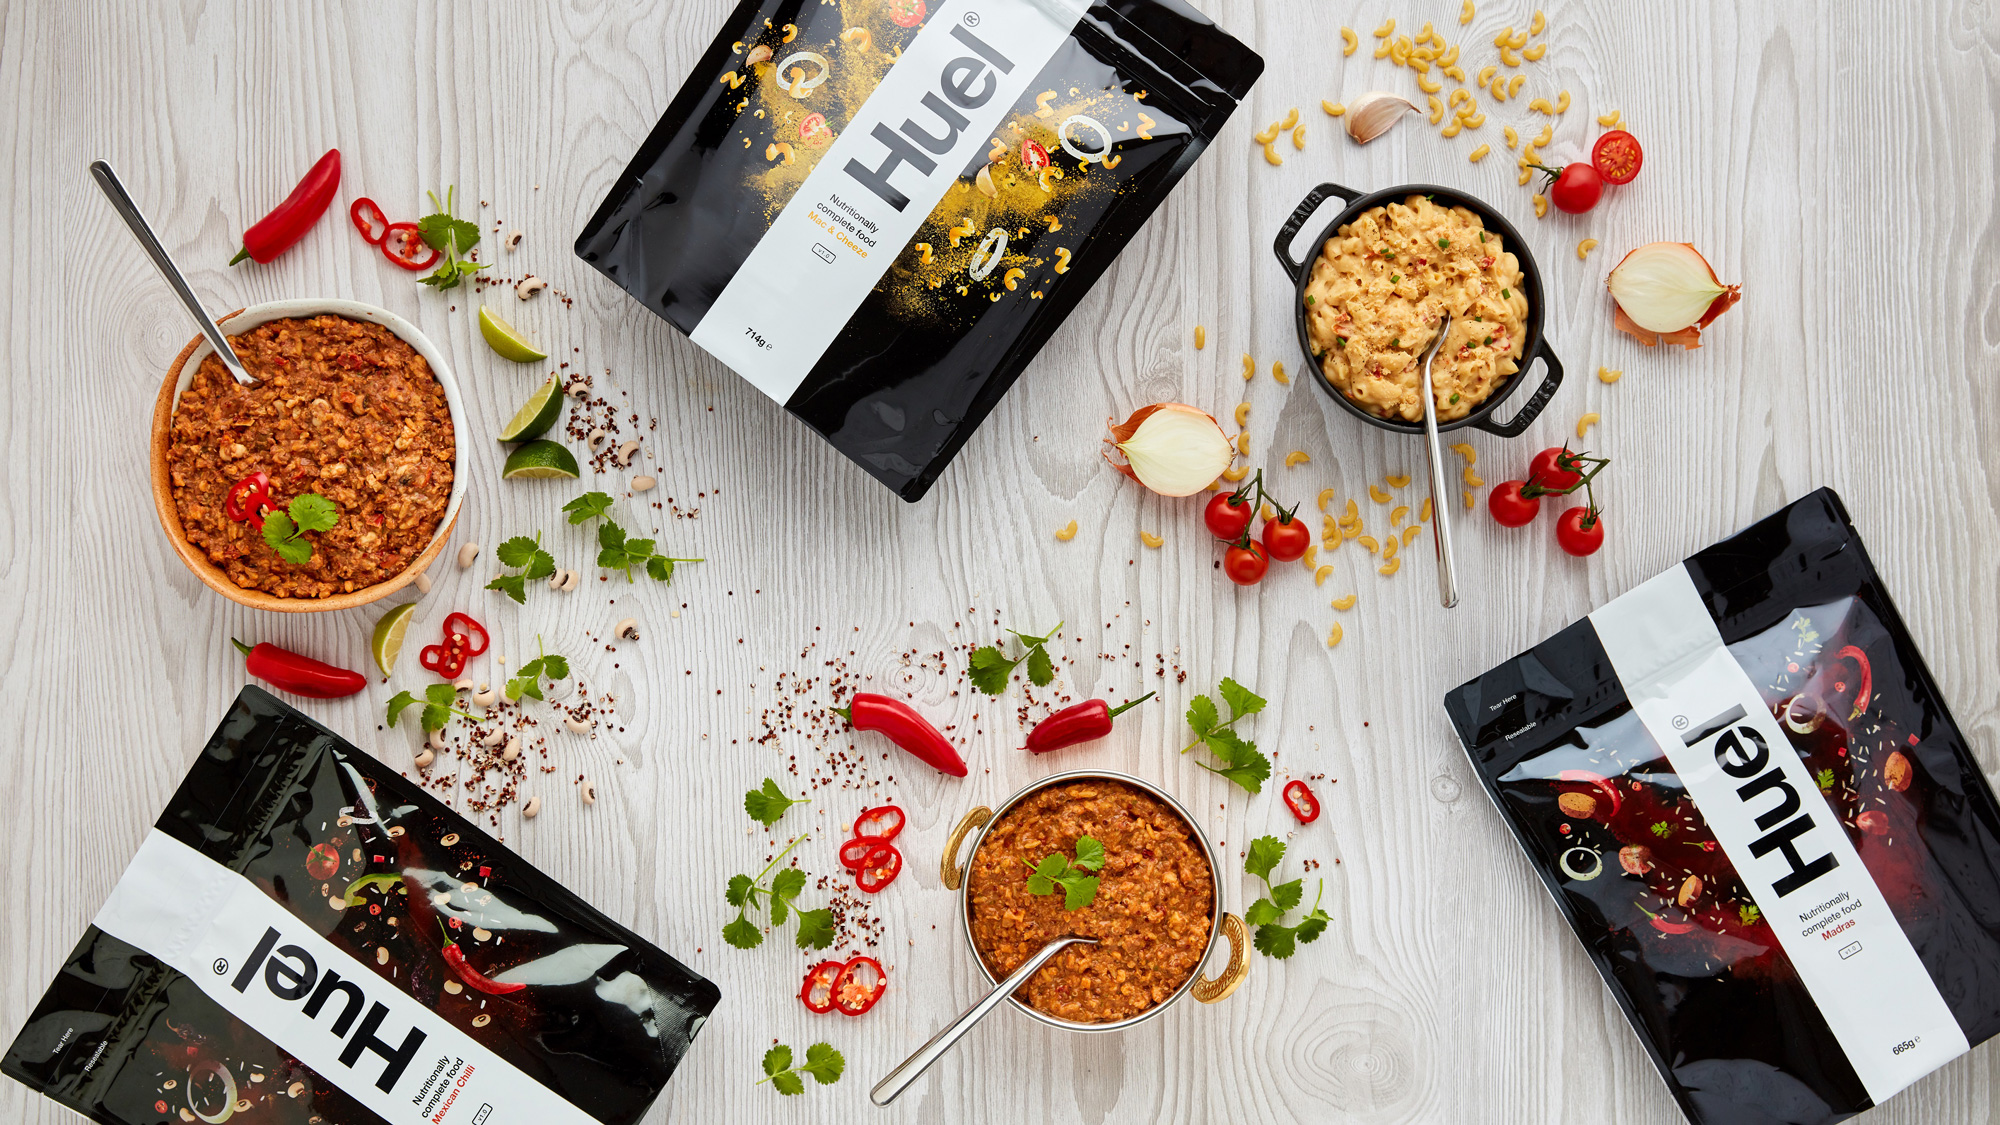 Huel Hot & Savoury Review: New Instant Meals Are Like Healthy Pot Noodles